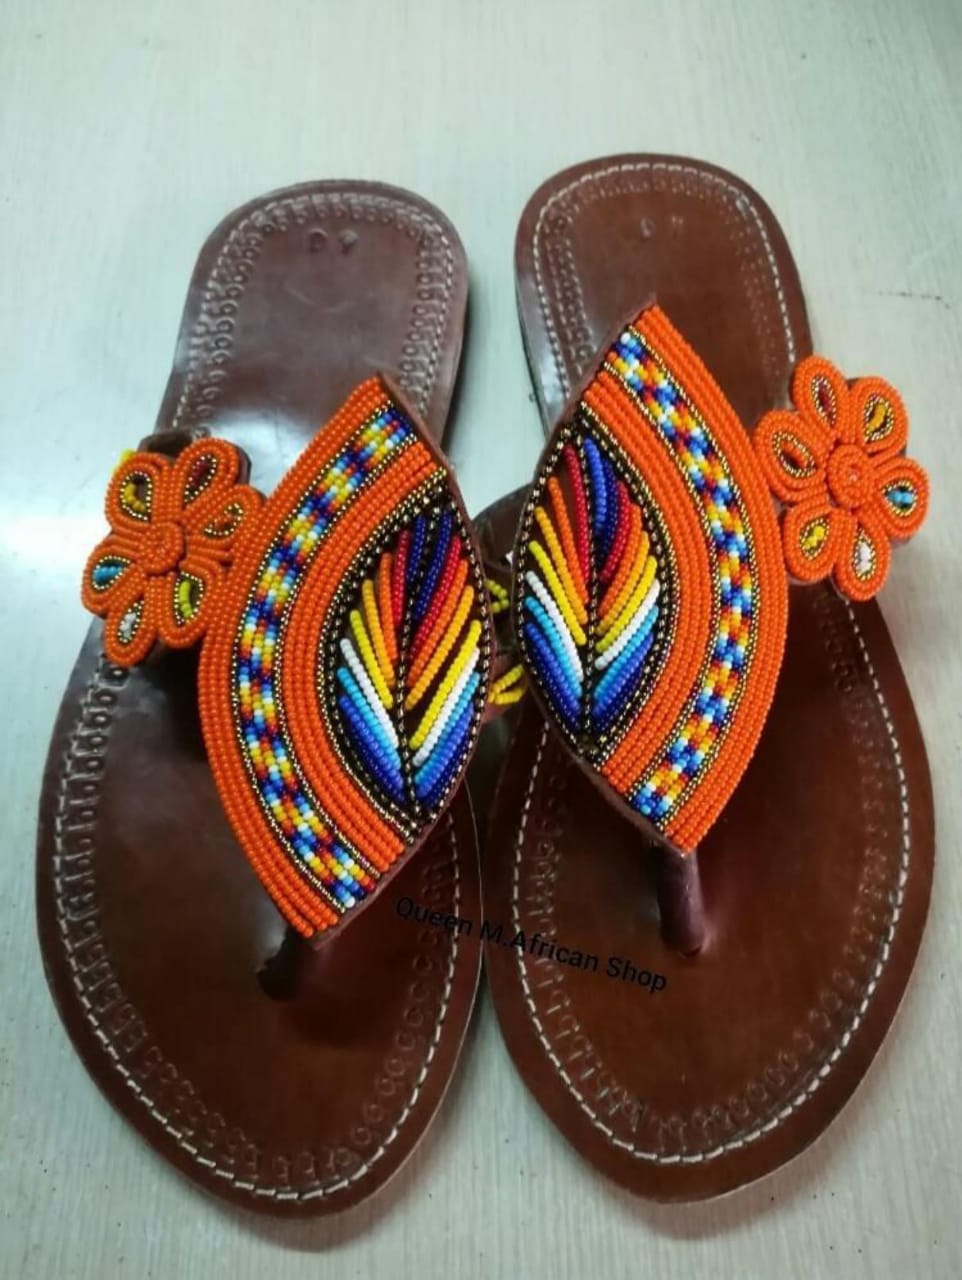 Leather sandals with beaded decorations; Beaded sandals; African sandals